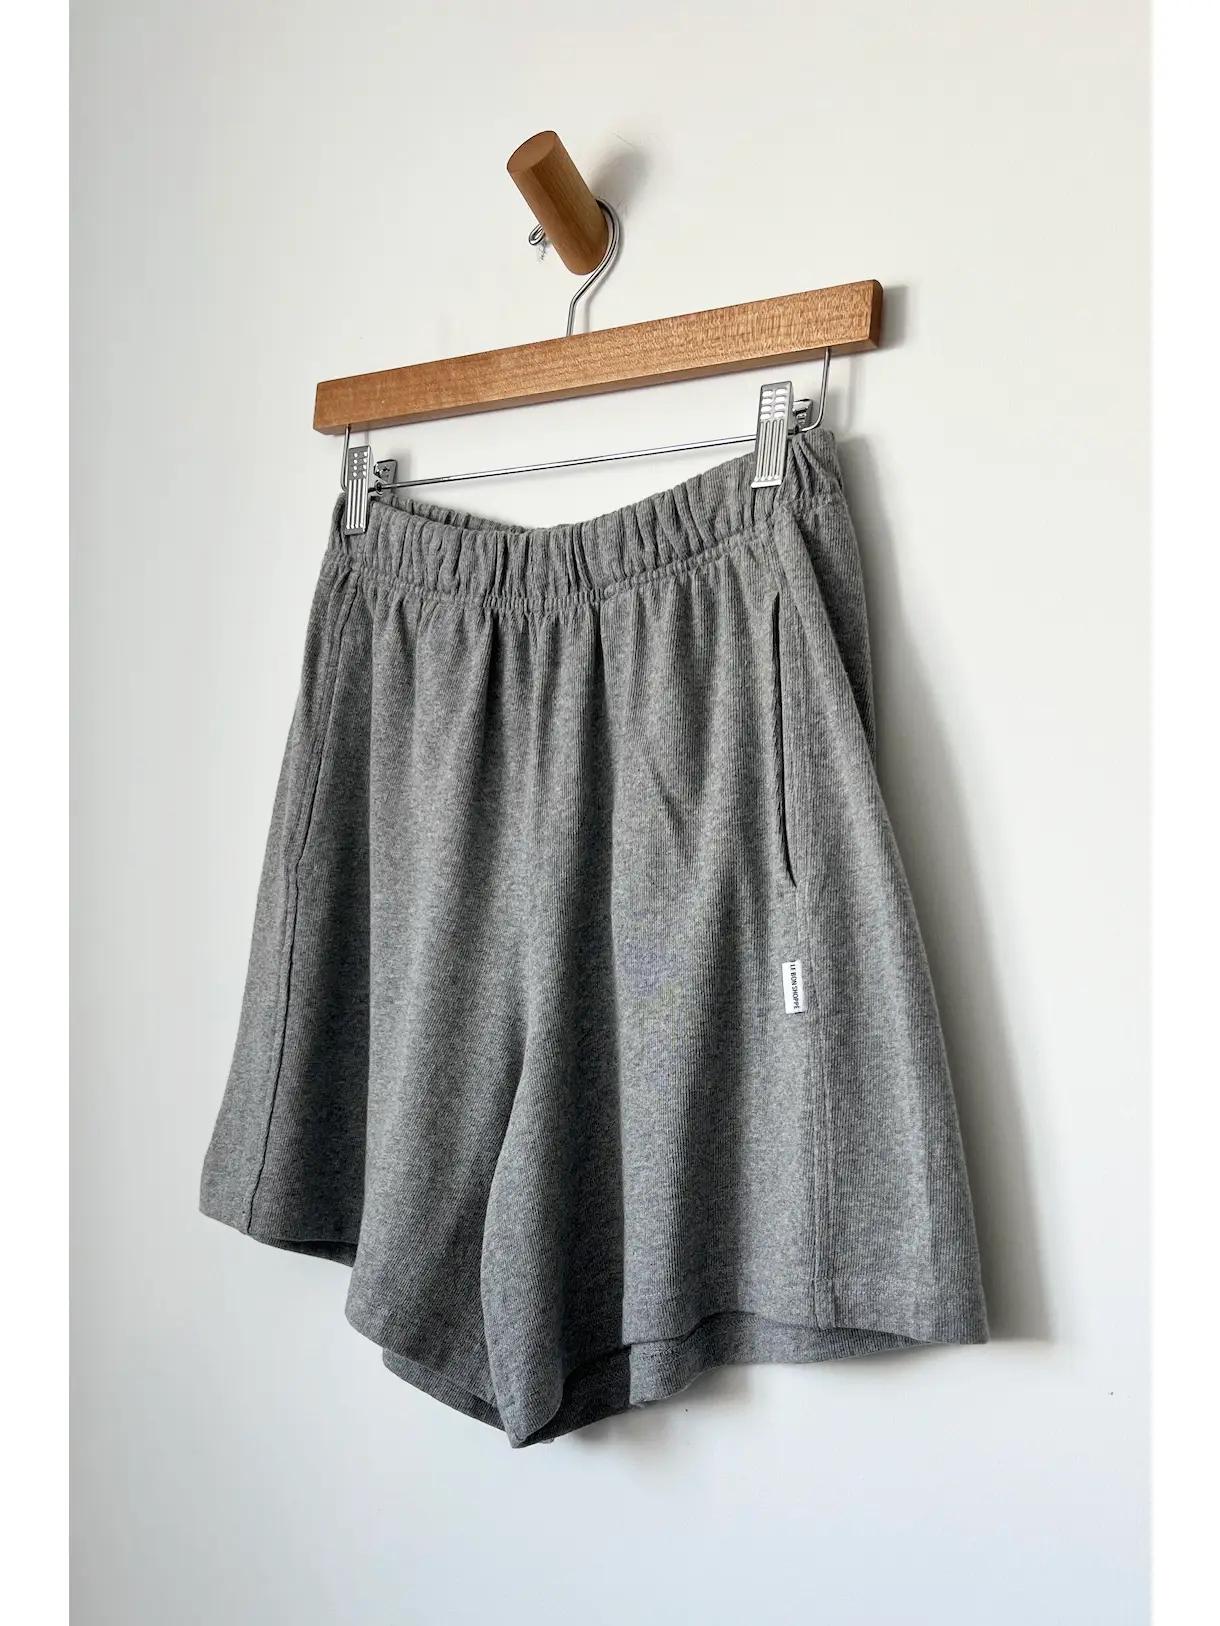 Product Image for Flared Basketball Shorts, Ht. Grey